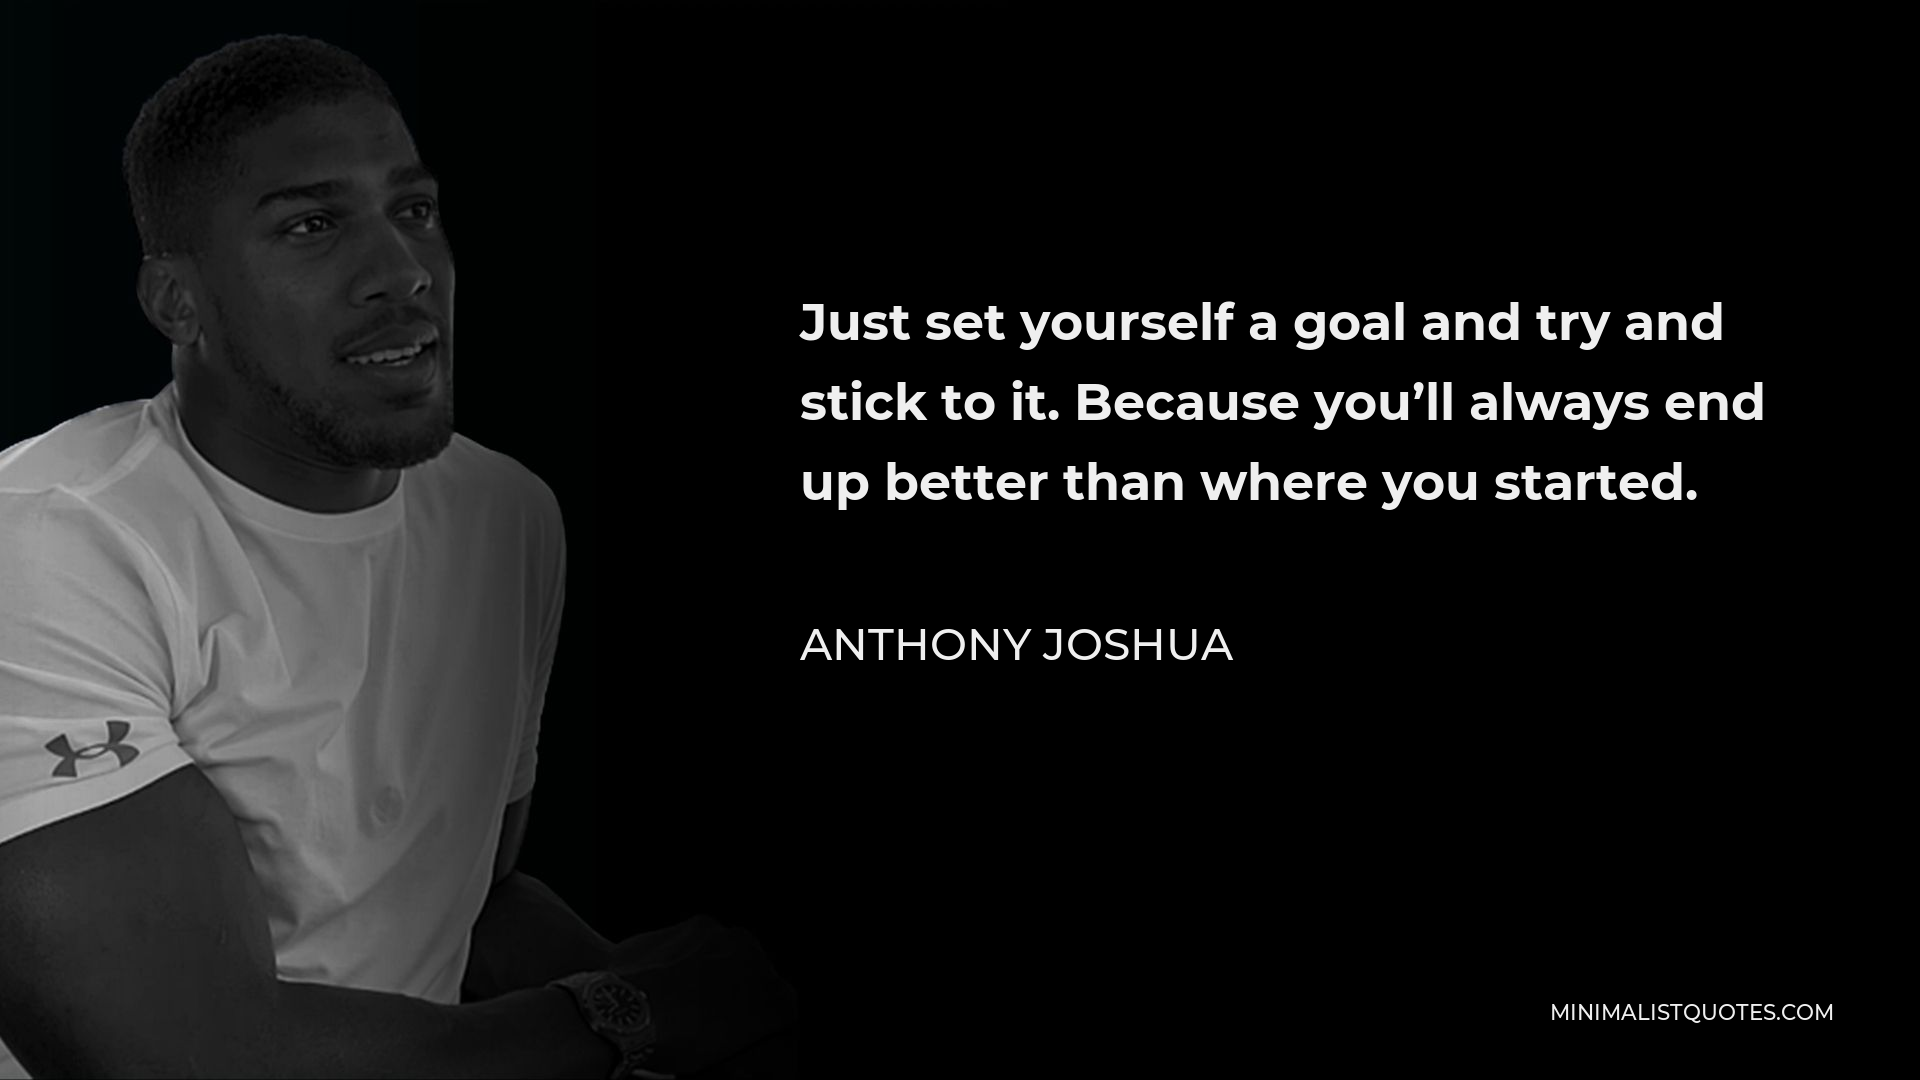 Anthony Joshua Quote - Just set yourself a goal and try and stick to it. Because you’ll always end up better than where you started.